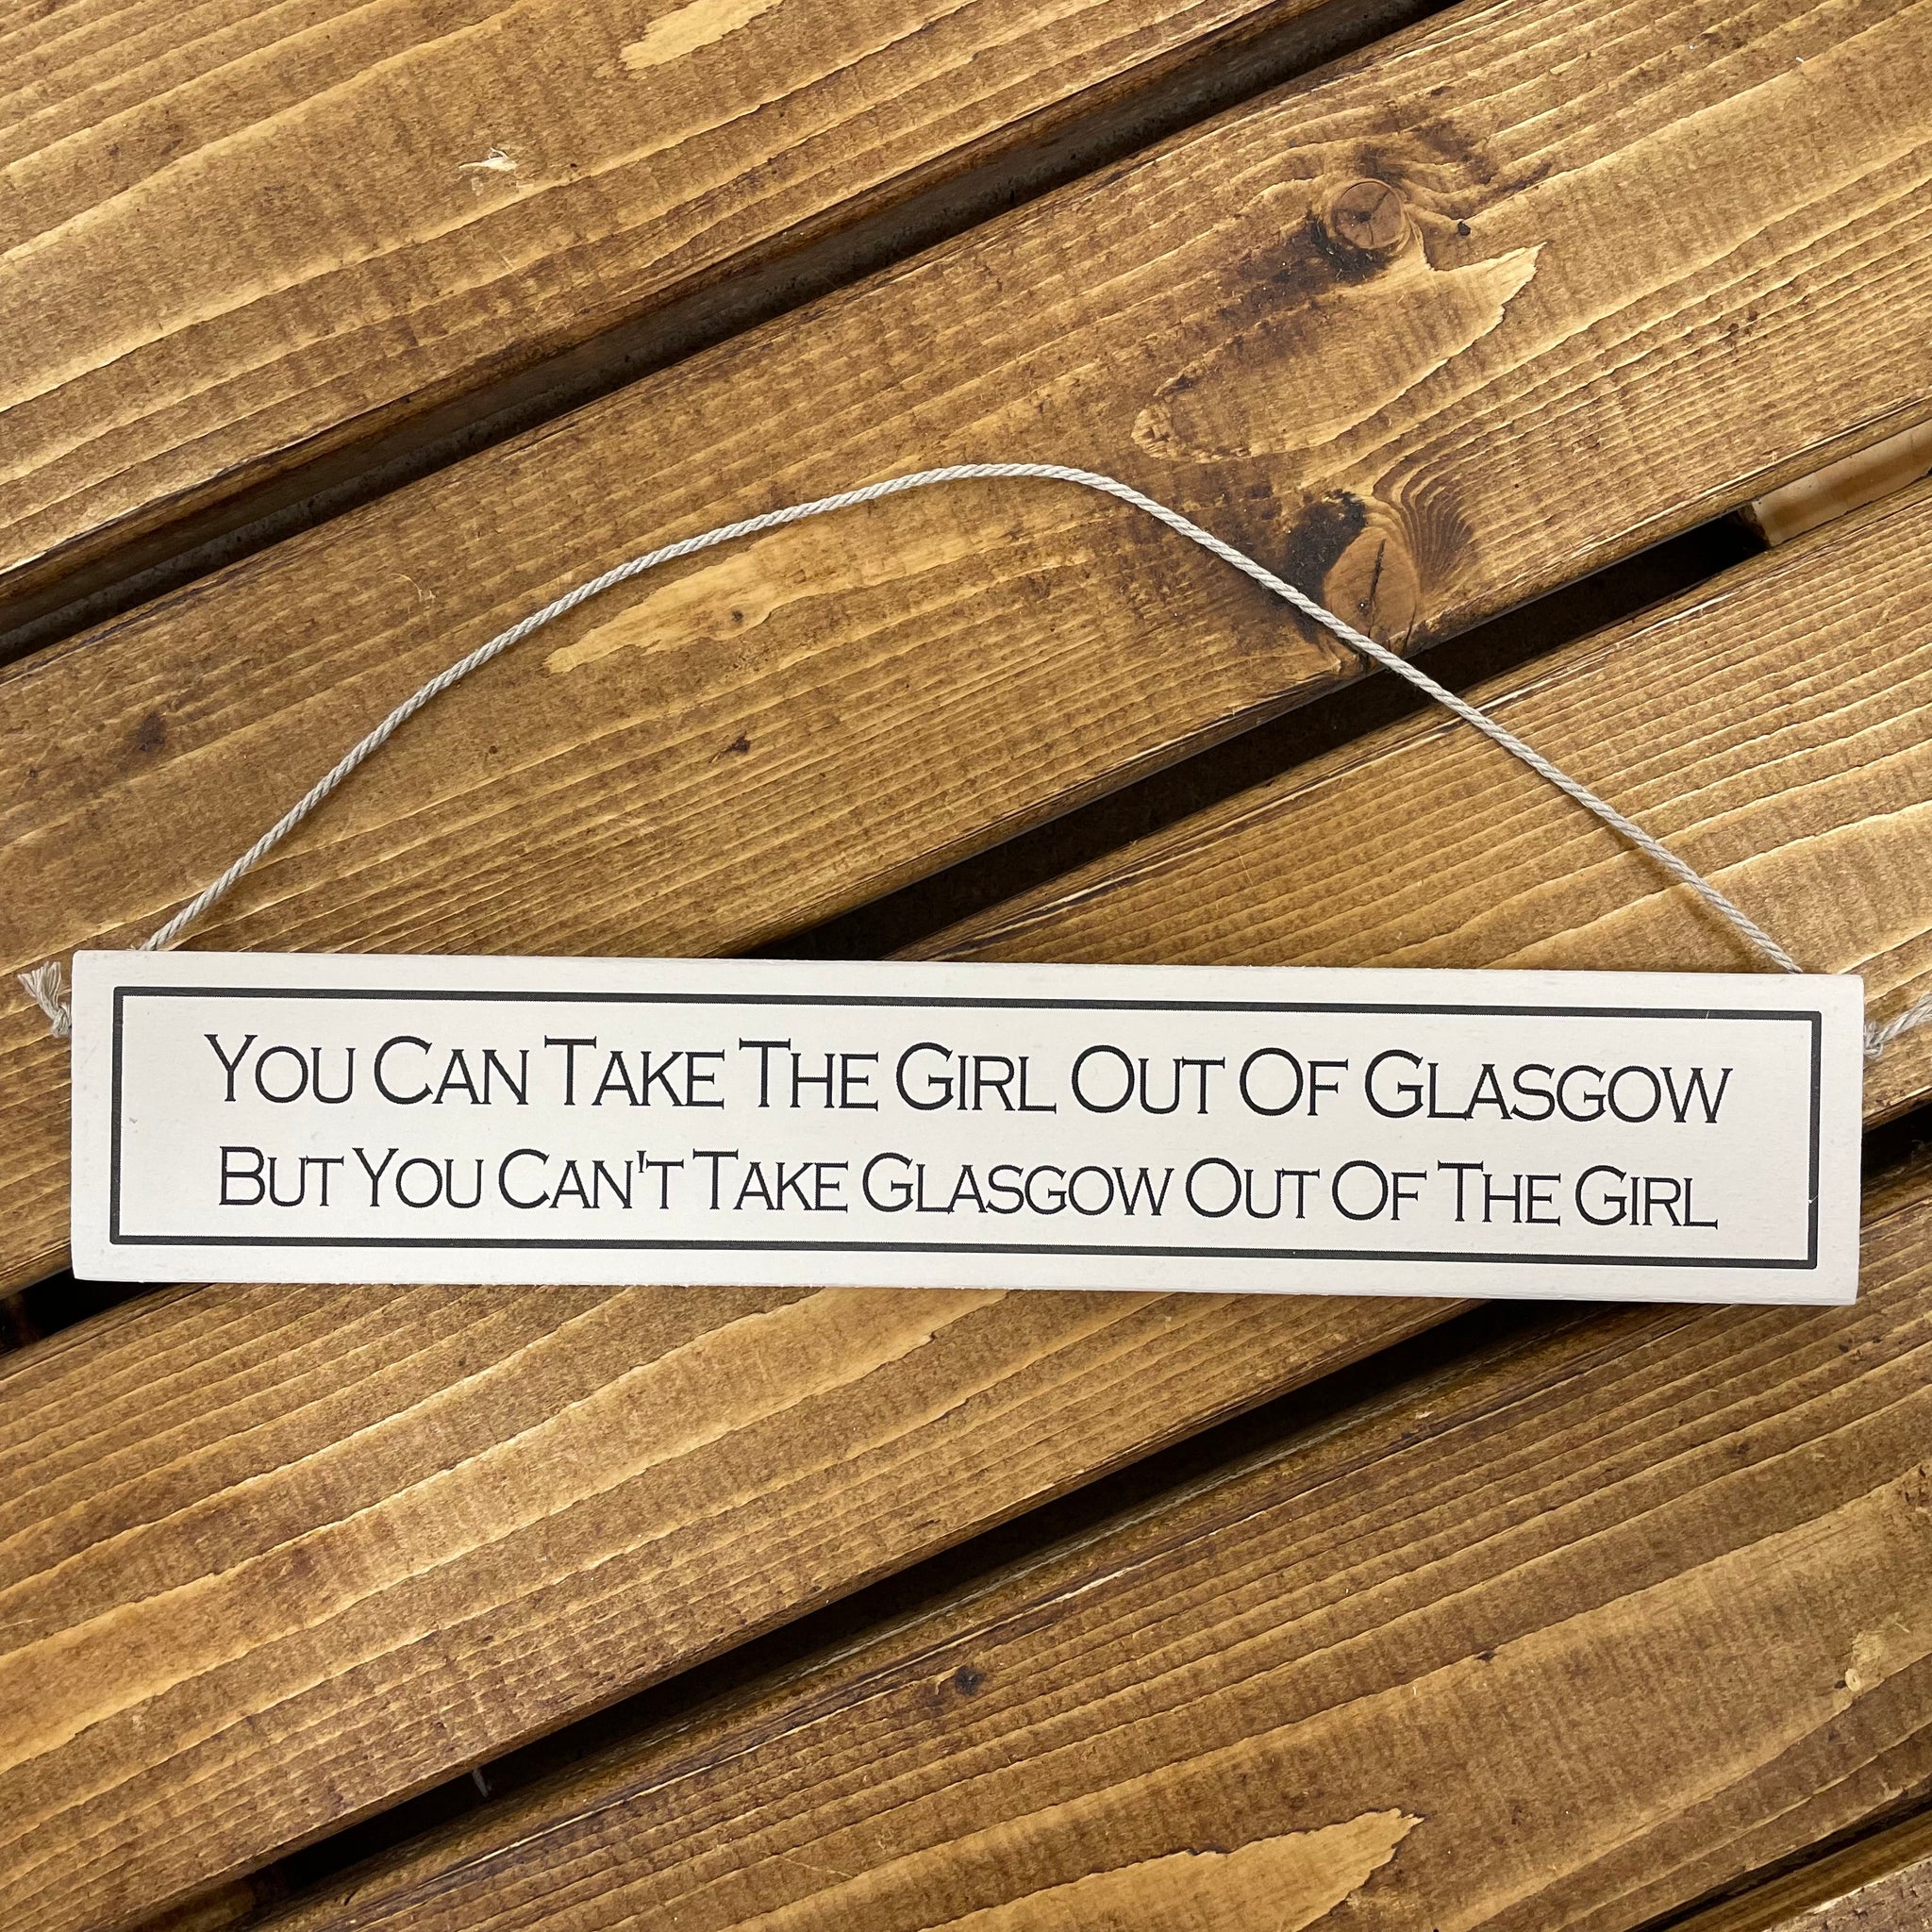 This wooden sign has to be the perfect gift for friends who love a little Scottish humour.    Rustic hanging wooden sign - hand painted with the printed slogan:  'You can take the girl out of Glasgow, but you can't take Glasgow out of the girl.'  Handmade in the UK